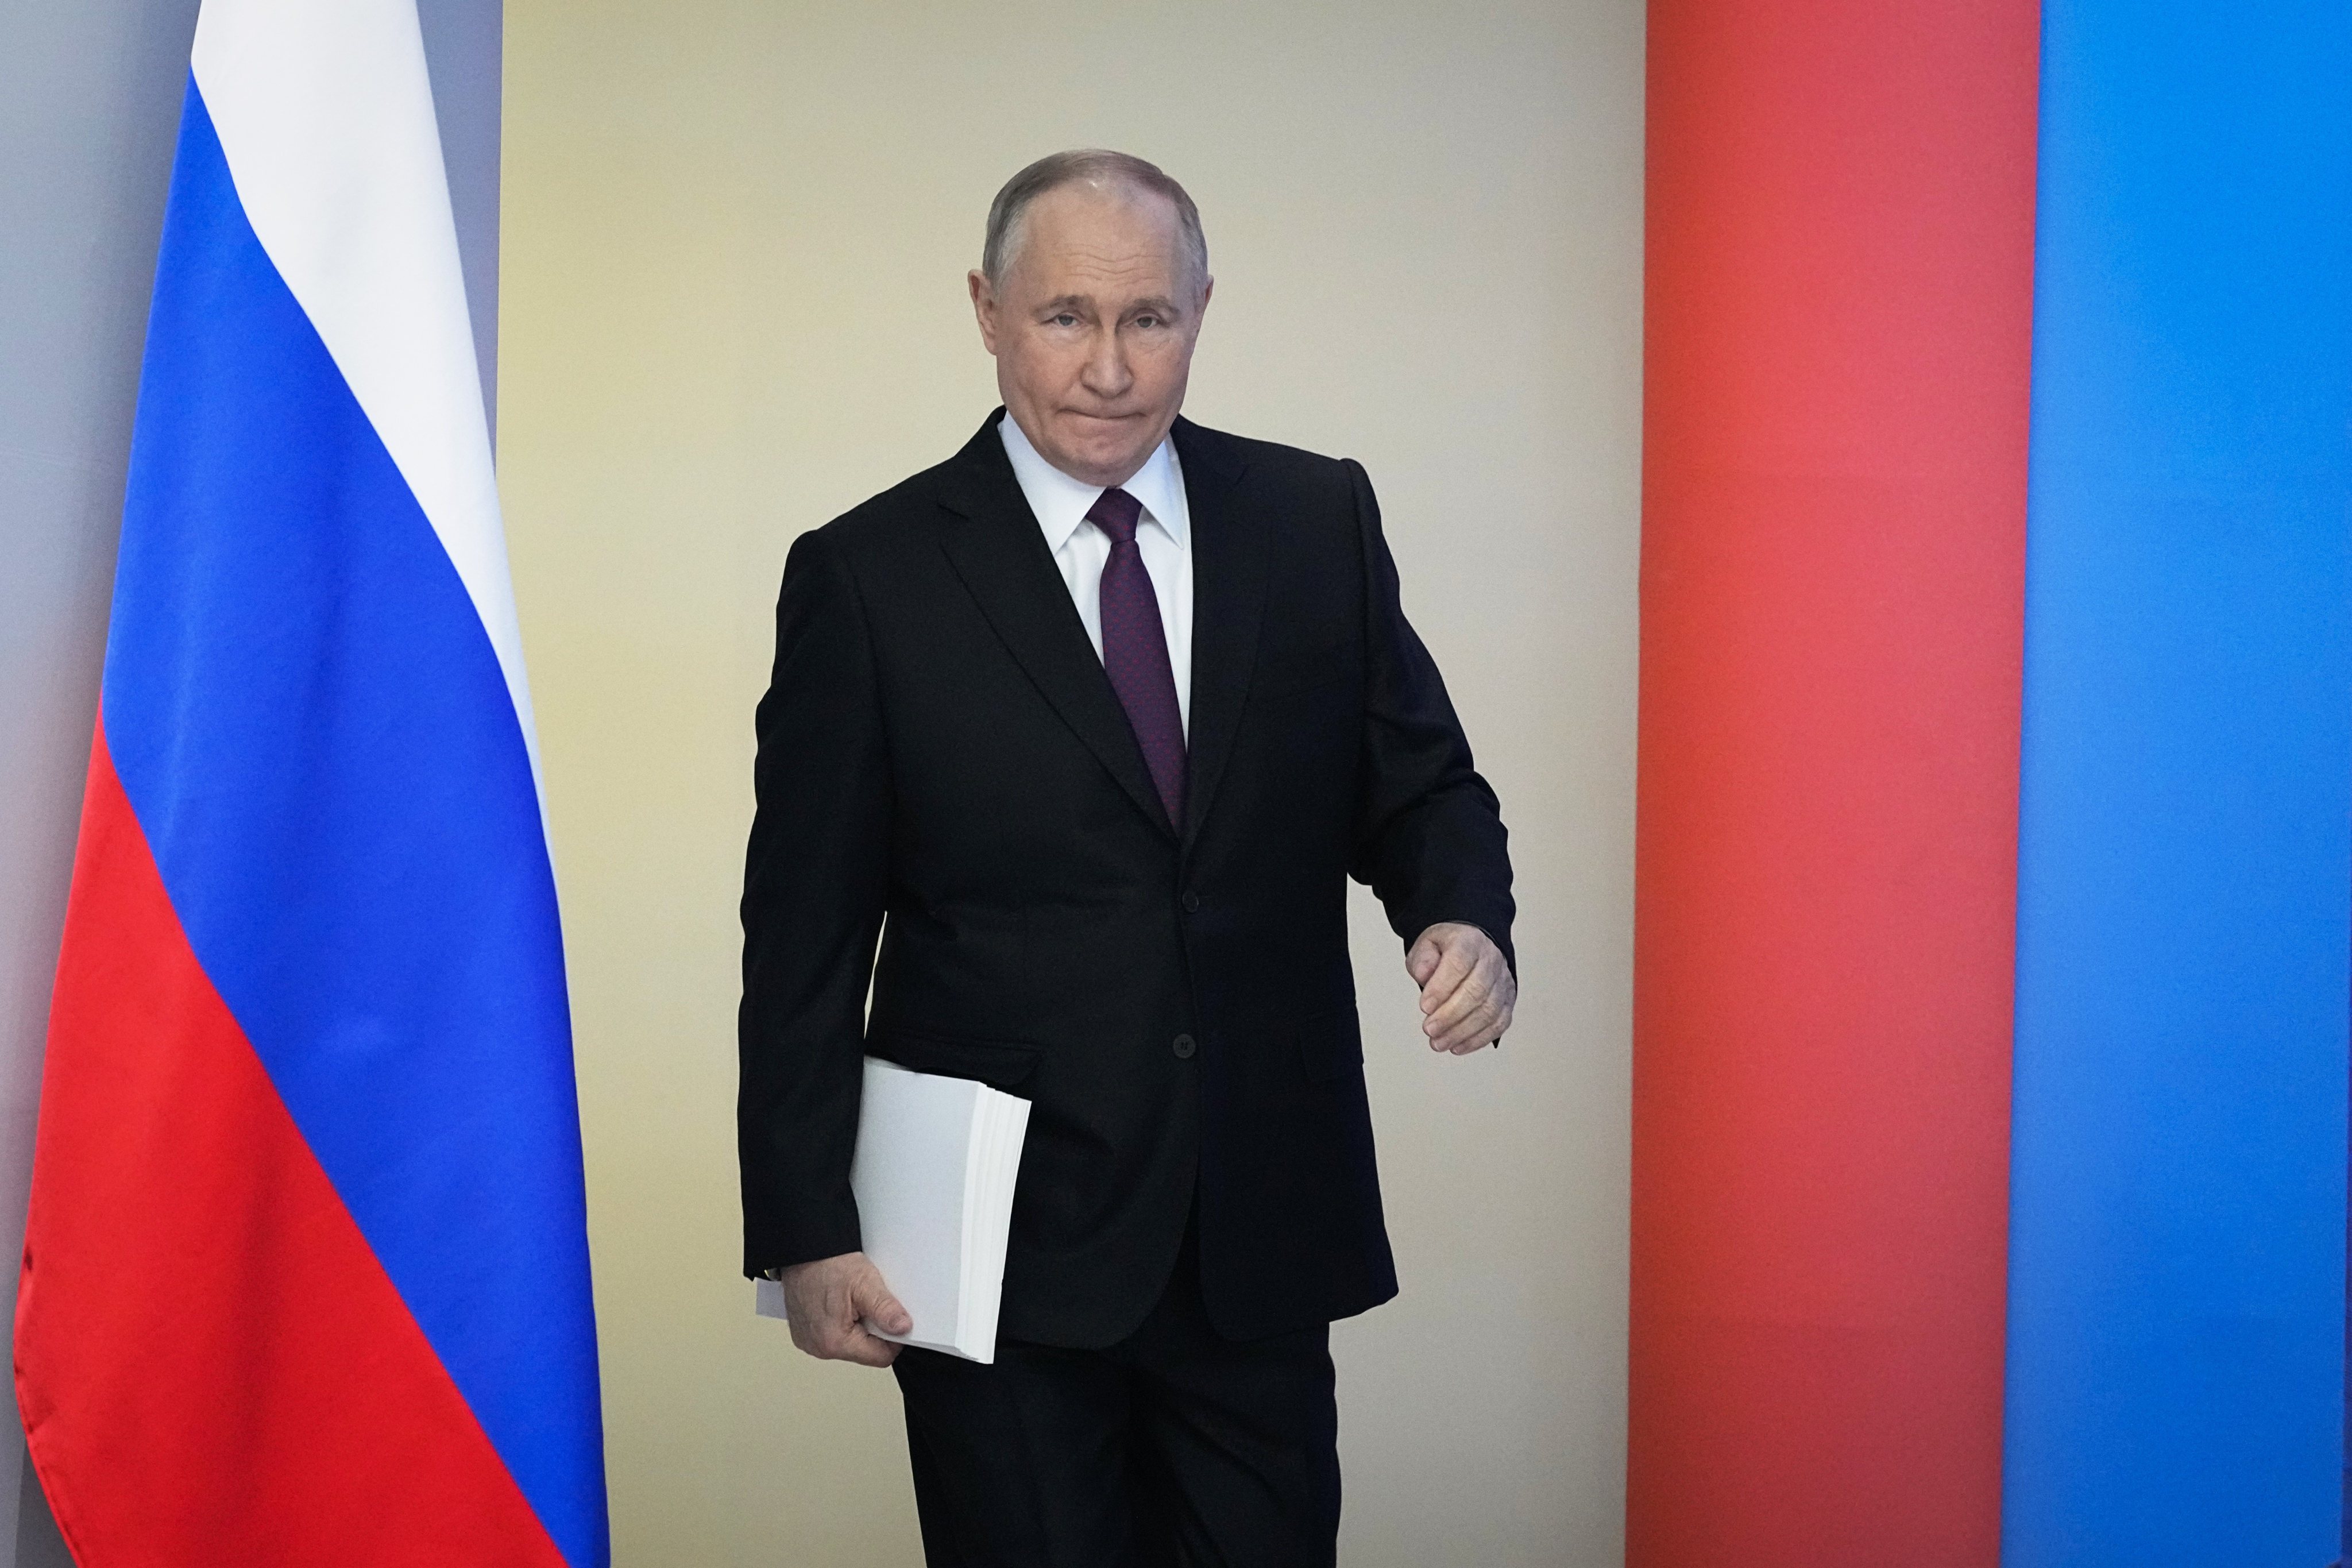 Russian President Vladimir Putin before delivering his state-of-the-nation address in February. Photo: AP